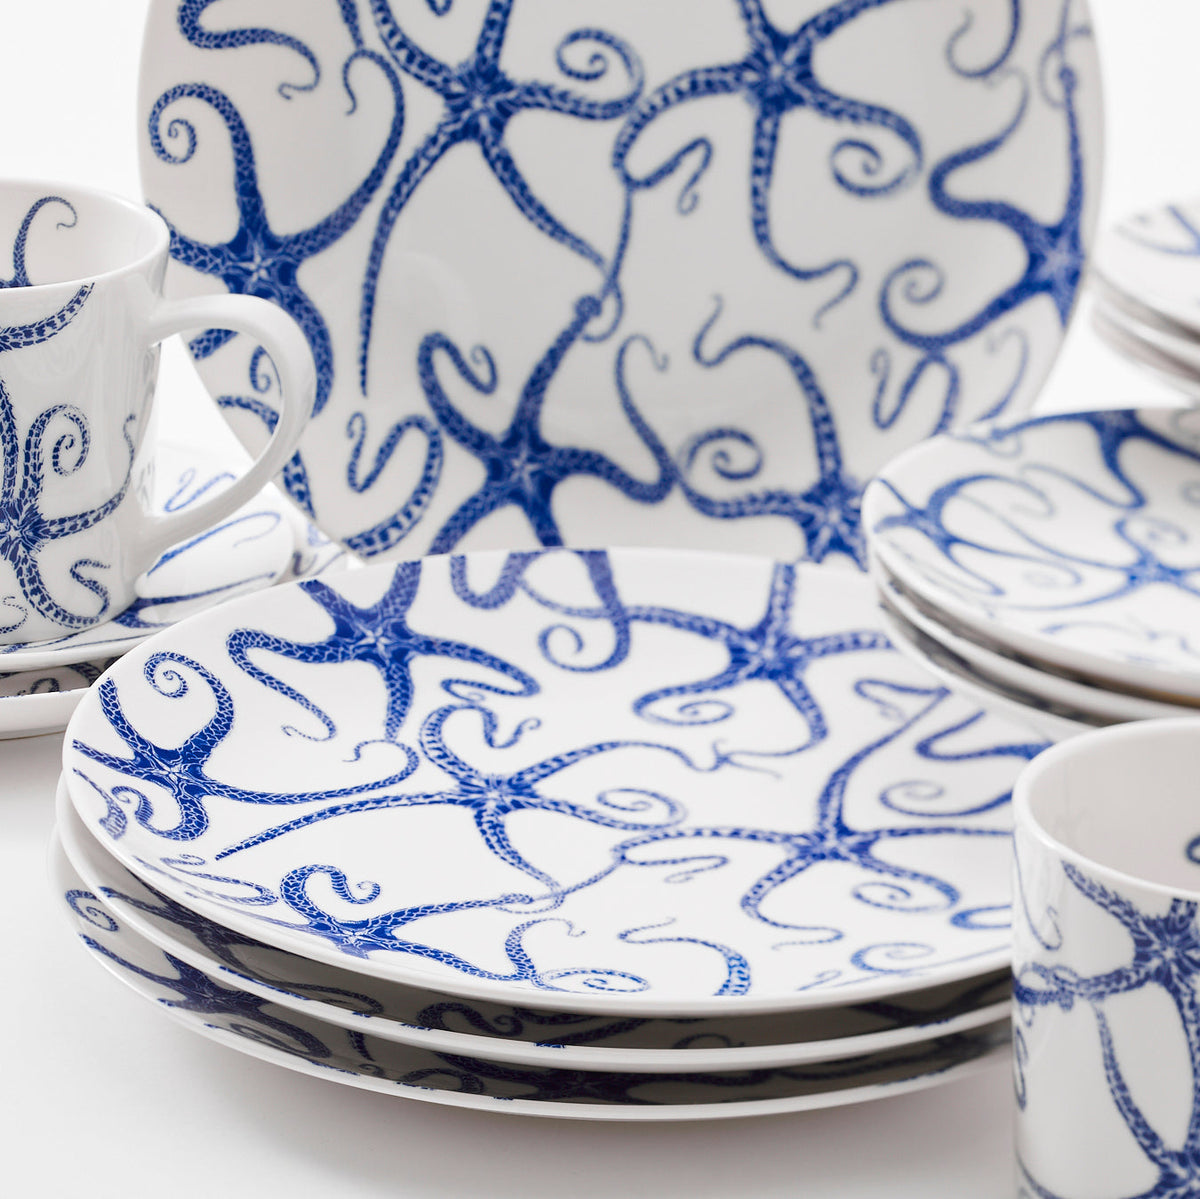 A collection of white premium porcelain dishes, cups, and bowls with blue octopus designs, including a Caskata Artisanal Home Starfish Coupe Salad Plate, arranged on a white surface.